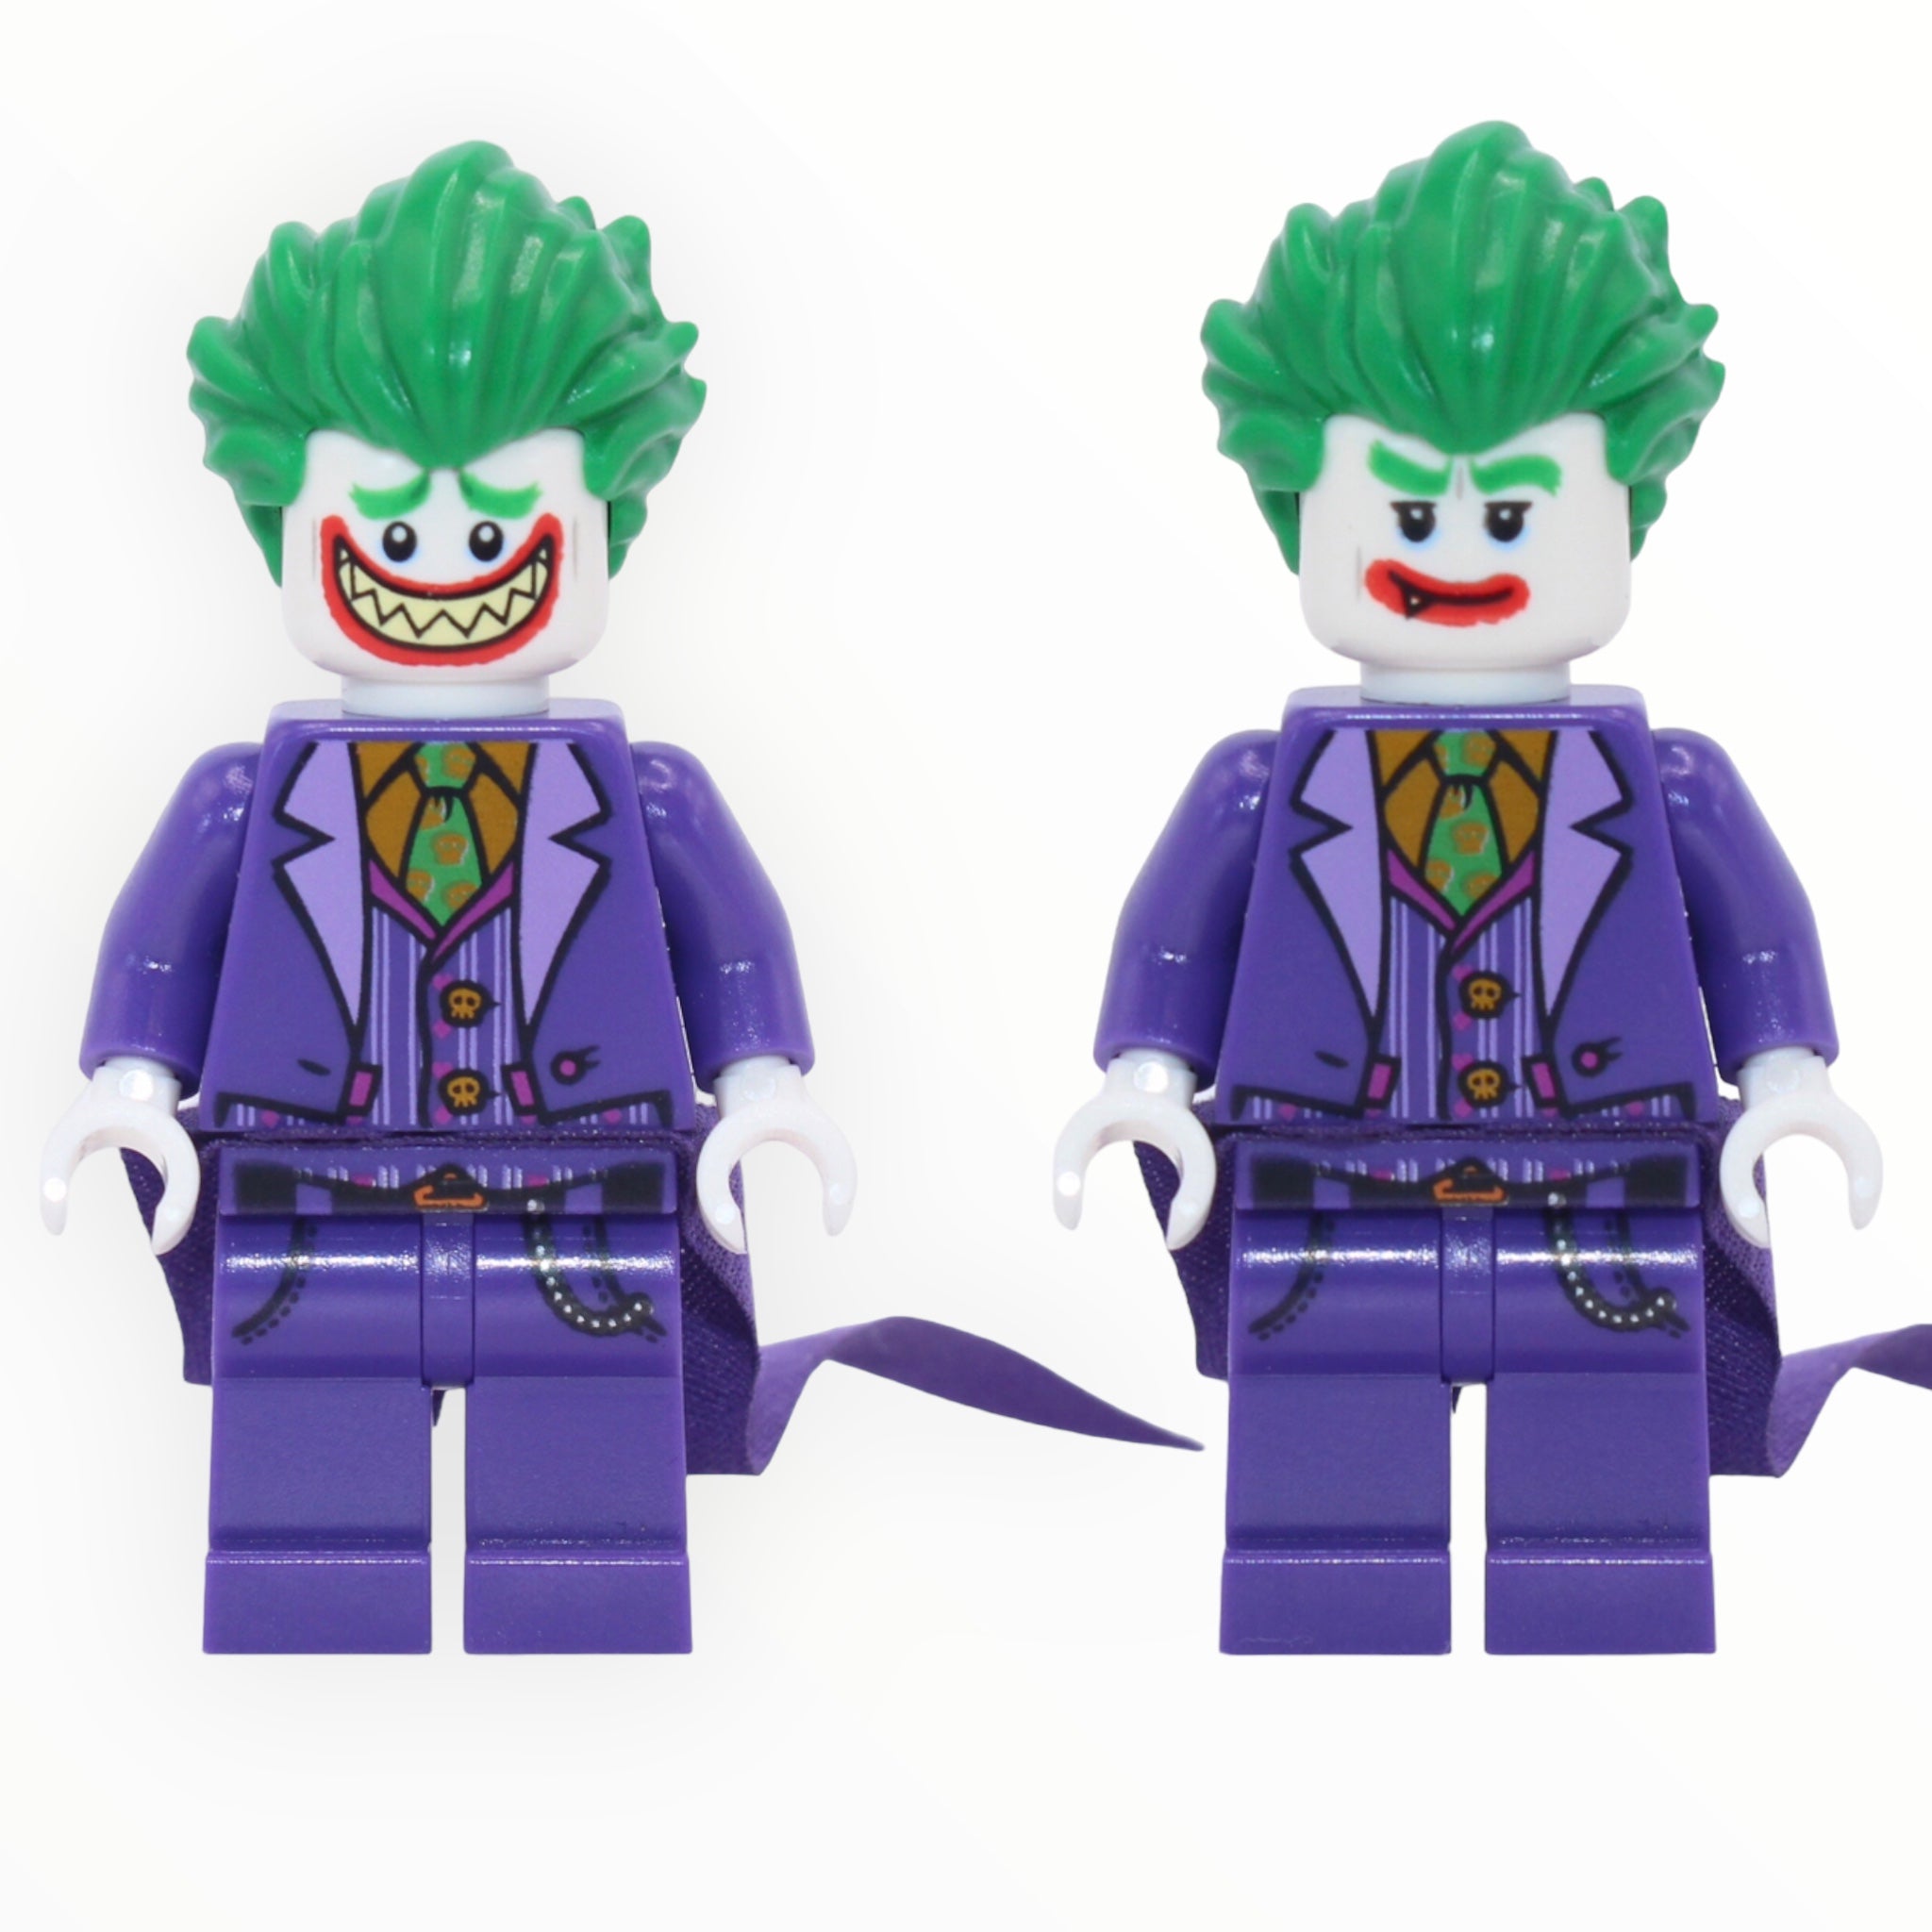 The Joker (The LEGO Batman Movie, coattails, smile with fang, worried grin)